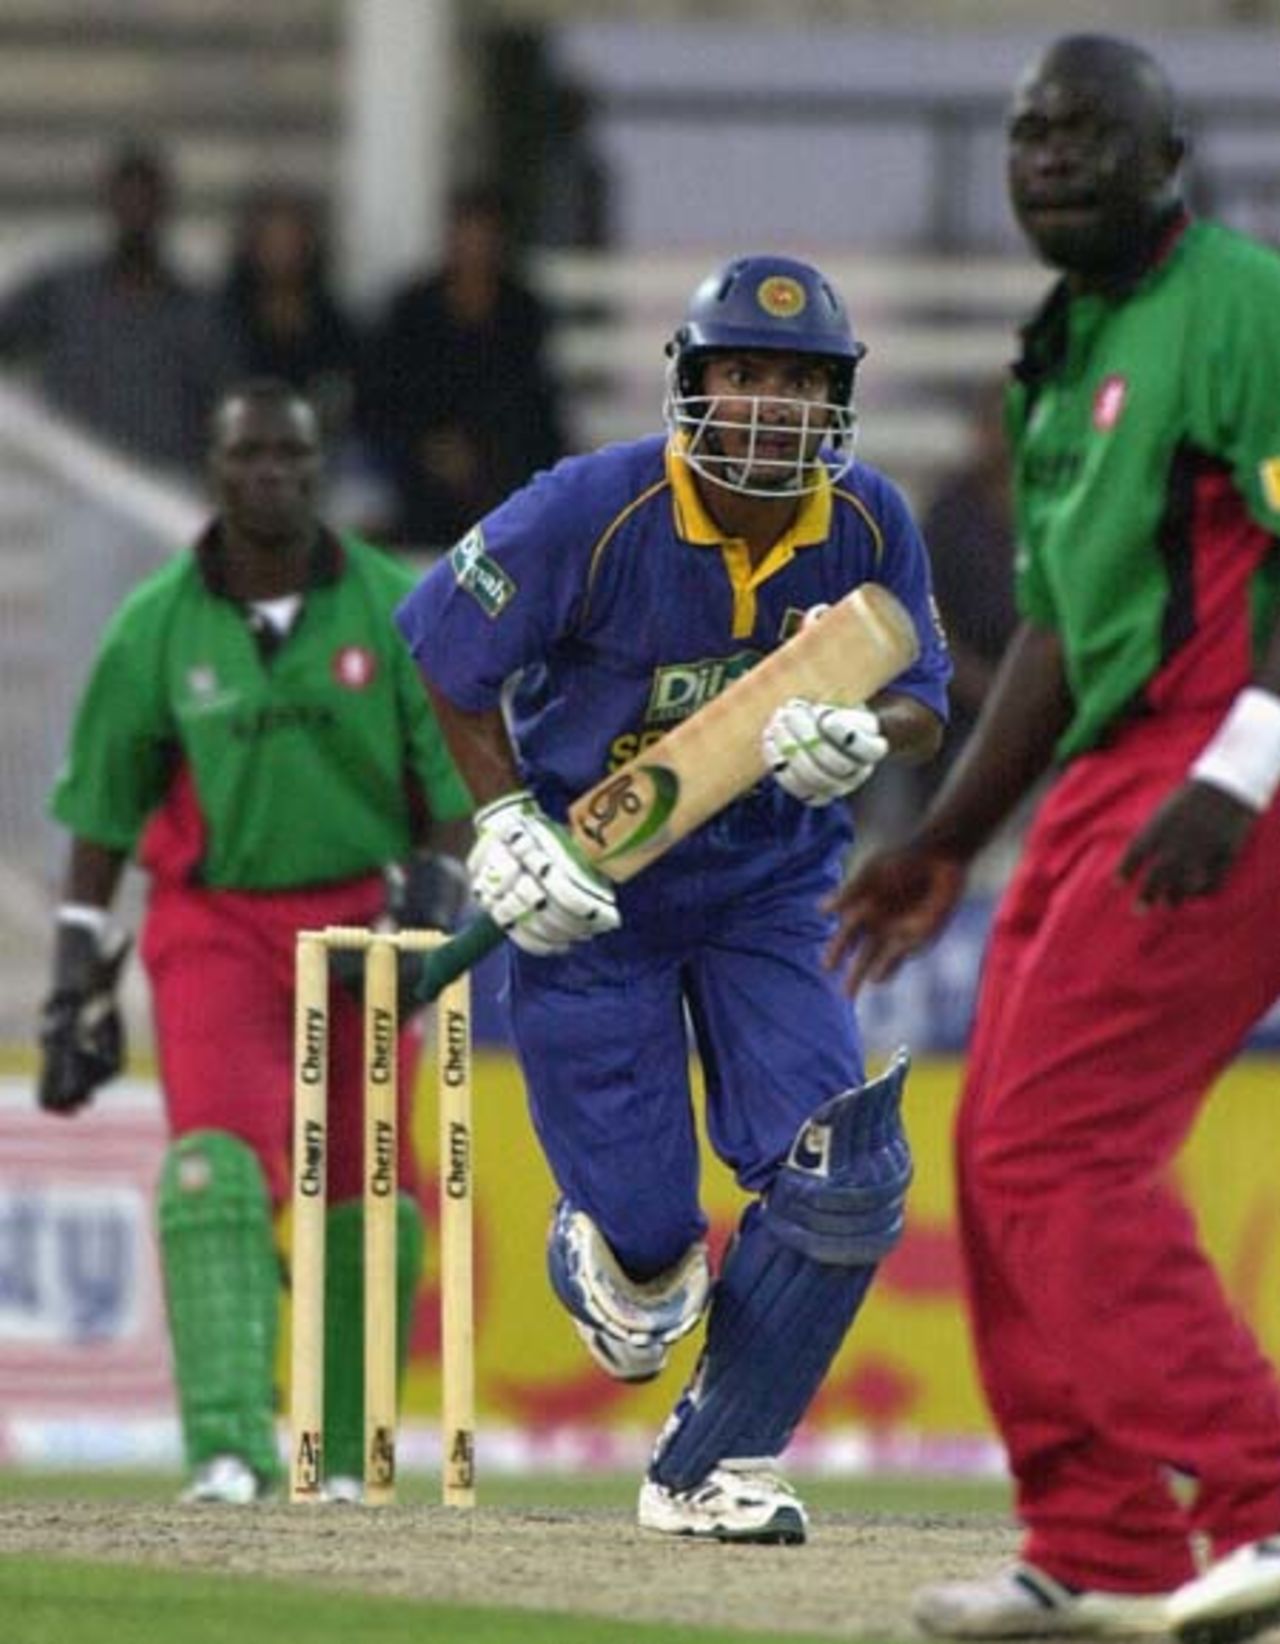 Sri Lanka's Kumar Sangakkara (C) rushes to complete his 2nd century of the tournament as Kenyan pacer Thomos Odoyo (R) watches the ball during the 4th one-day match in the Four Nation Sharjah Cricket Tournament, 06 April 2003.